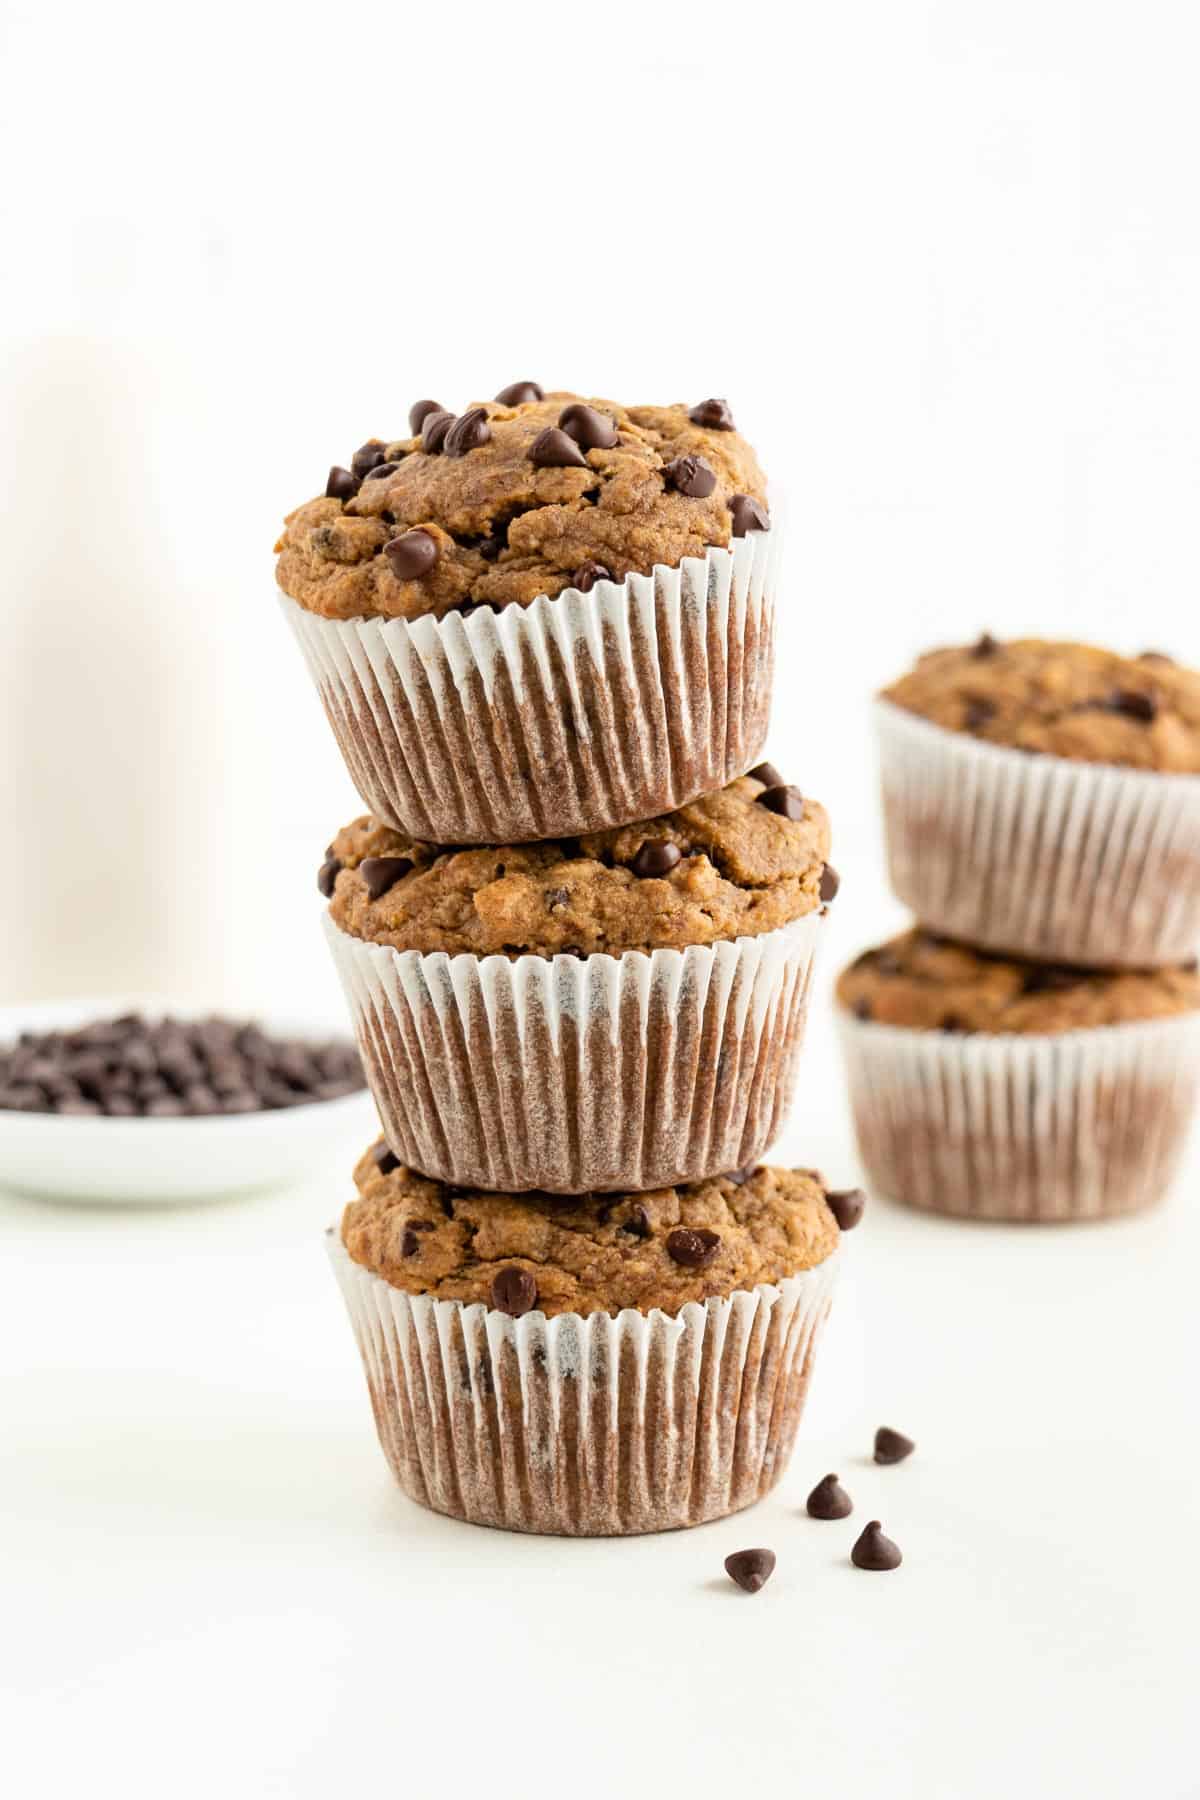 three gluten-free vegan banana chocolate chip muffins stacked on top of each other in front of a glass of almond milk and bowl of chocolate